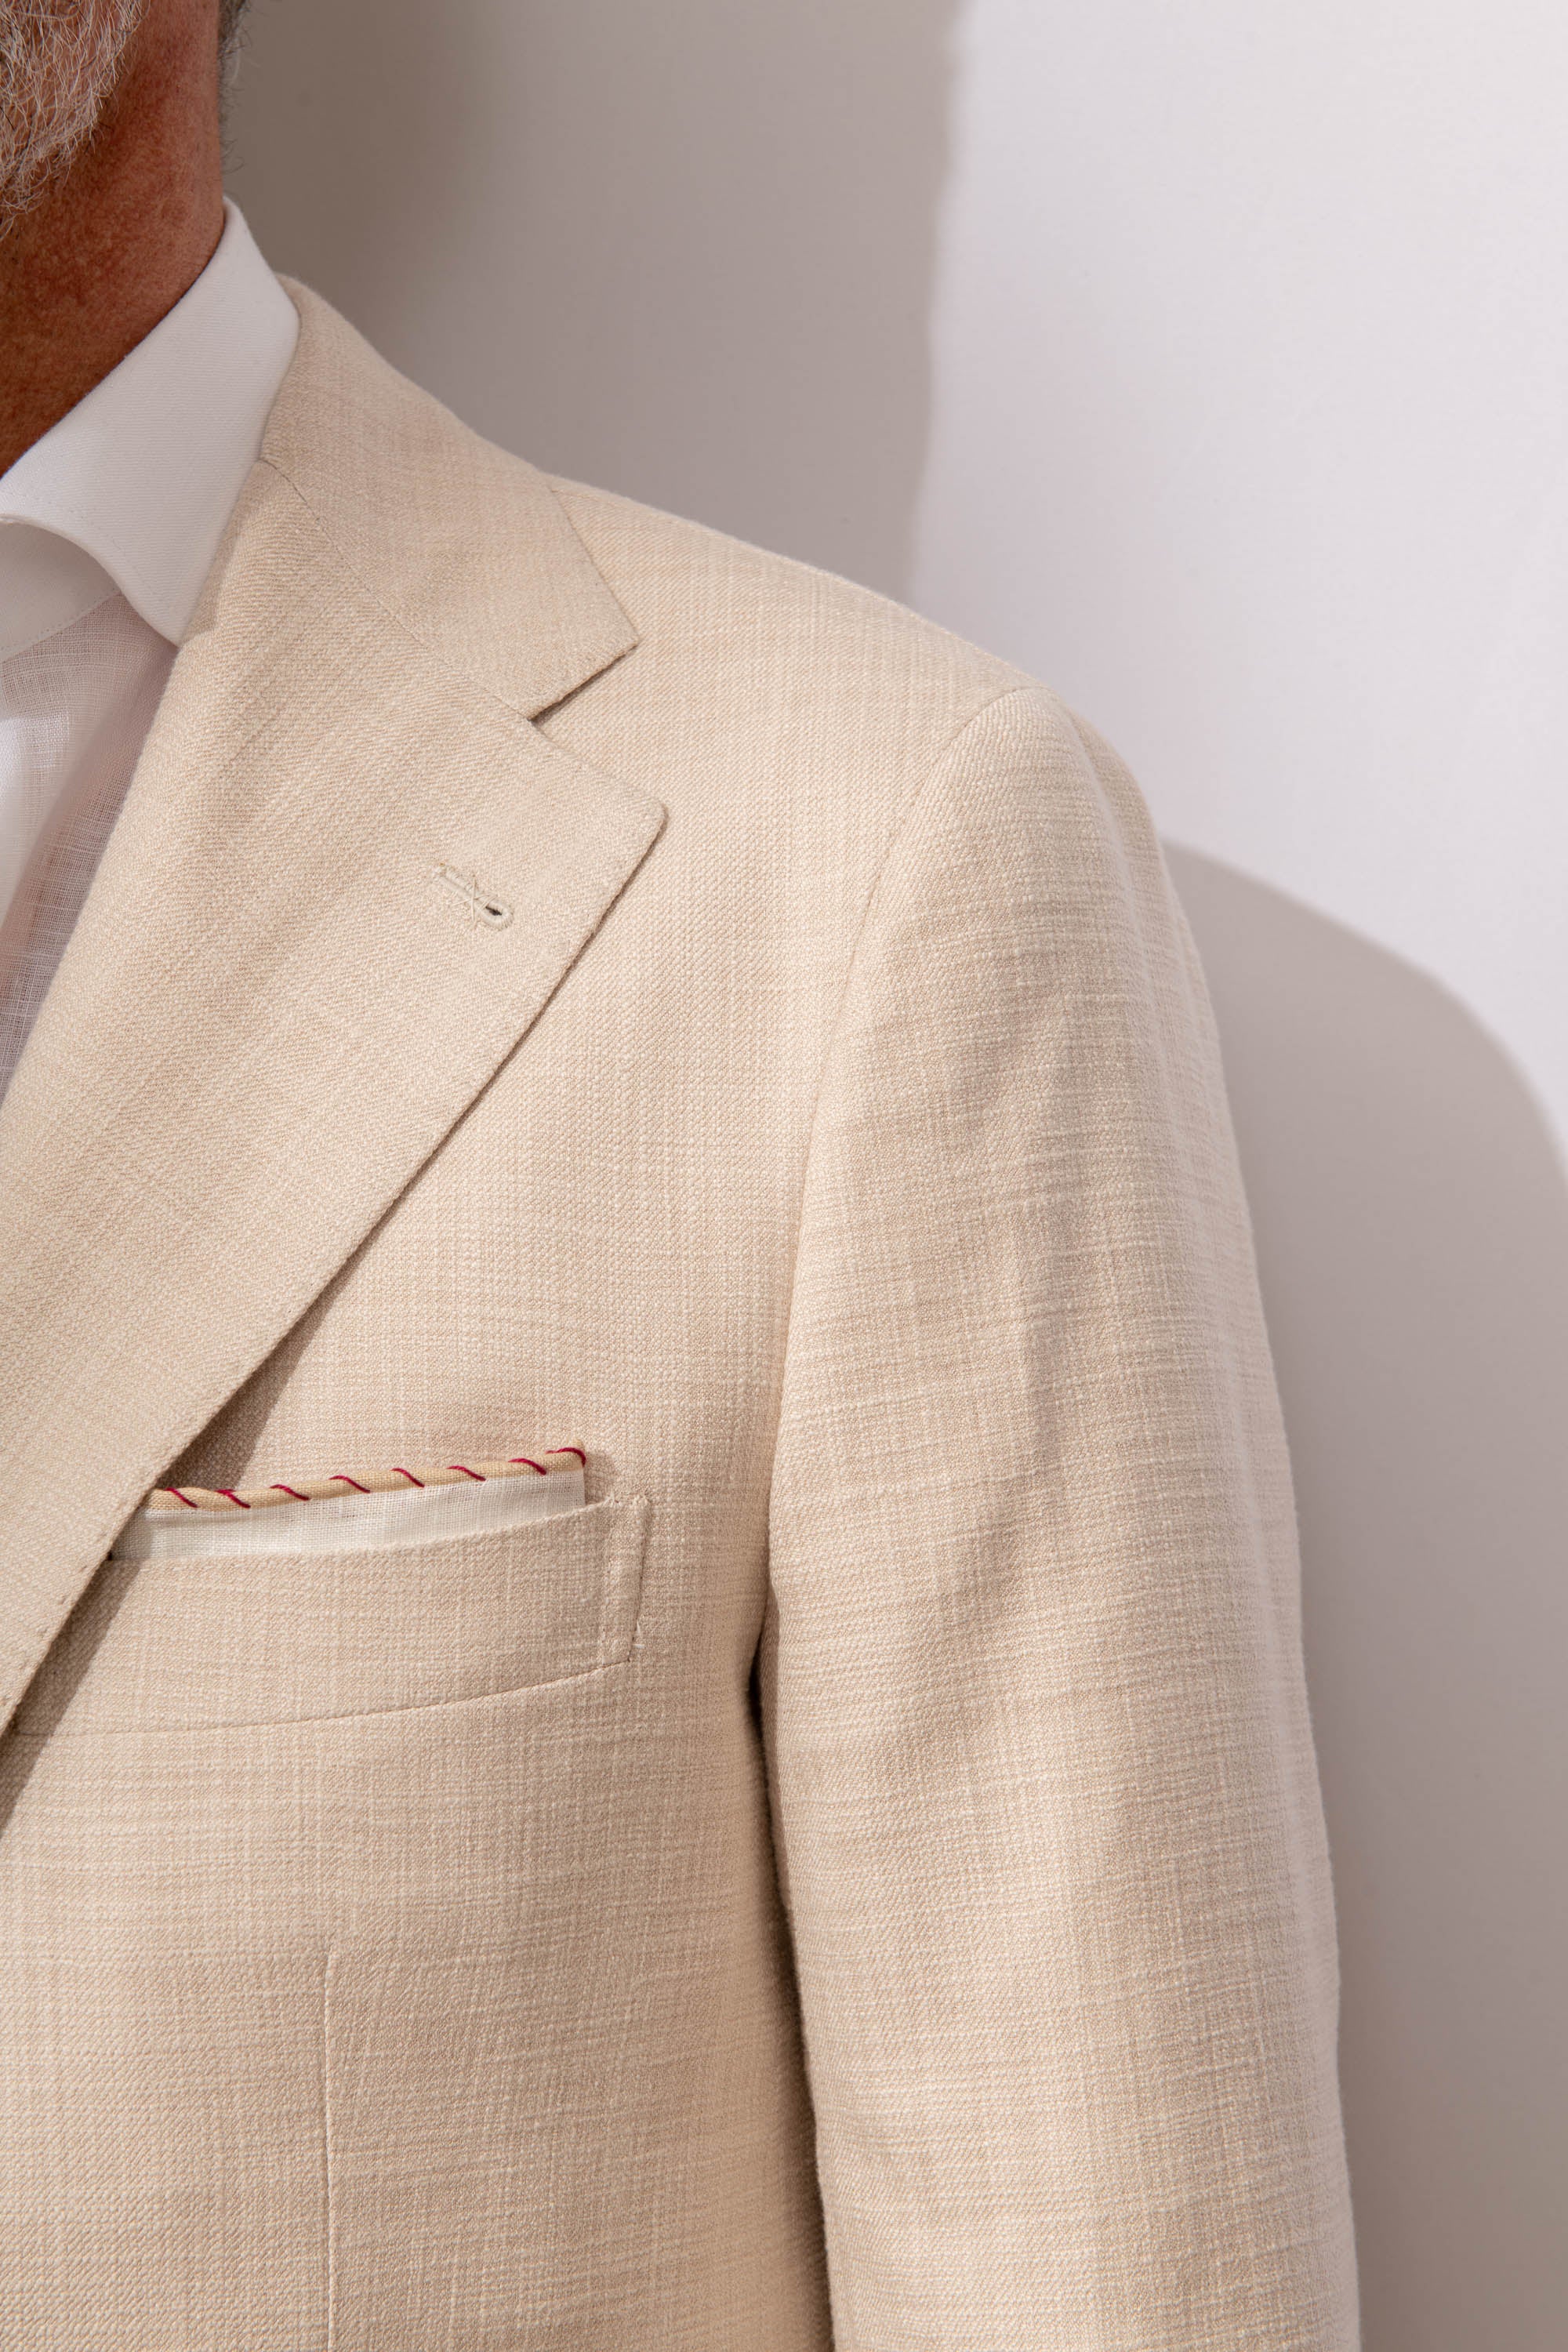 Beige jacket in Loro Piana fabric - Made in Italy